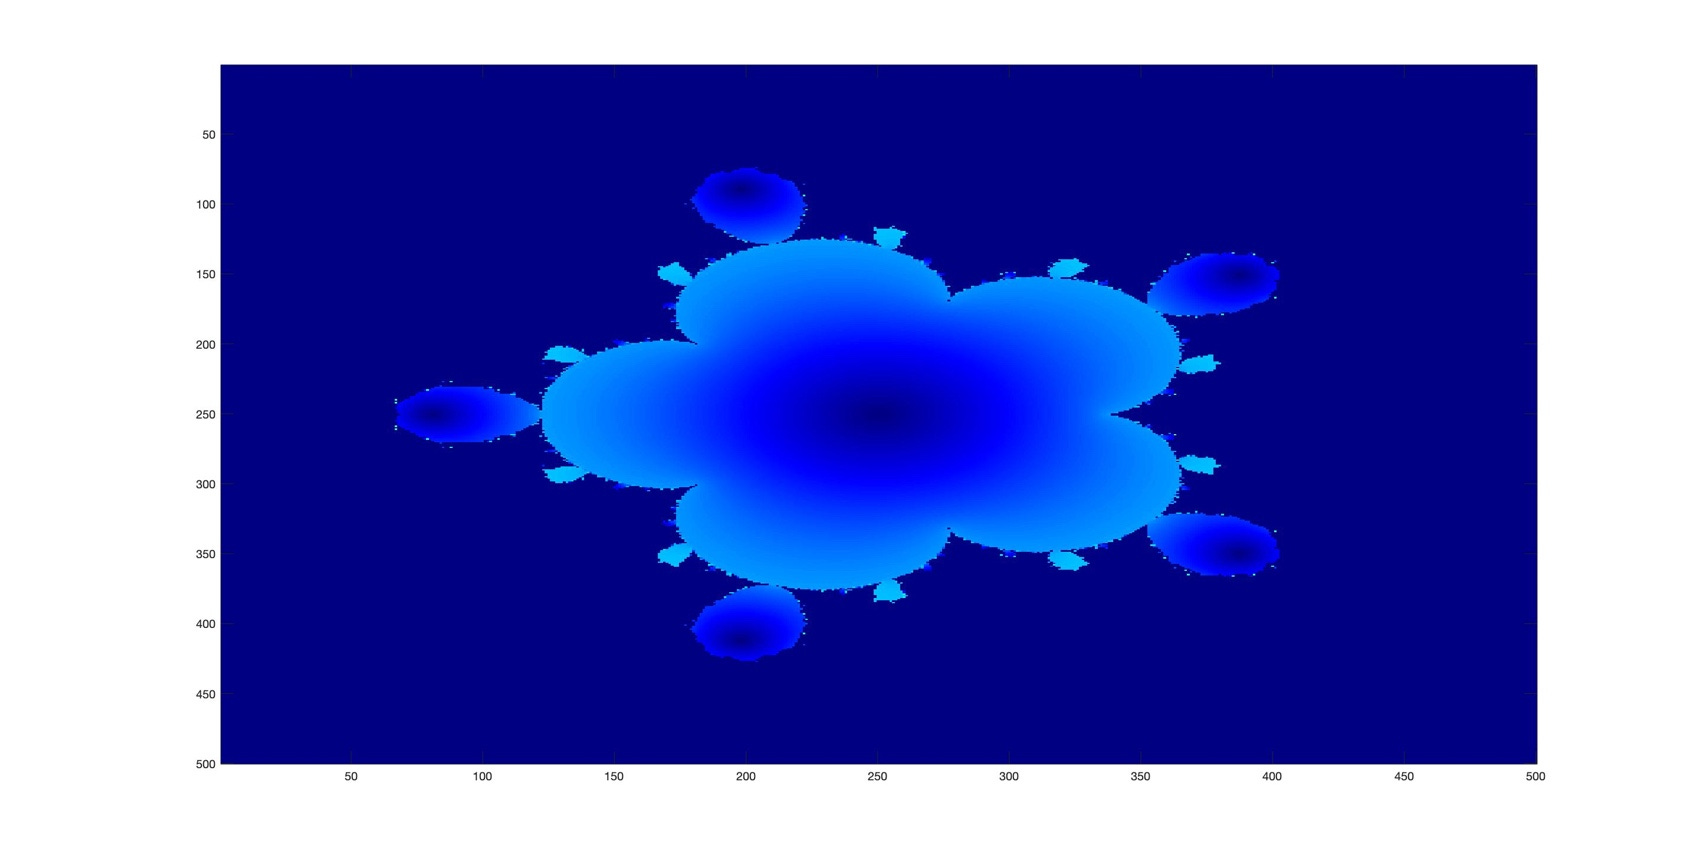 A group of jellyfish

Description automatically generated with low confidence